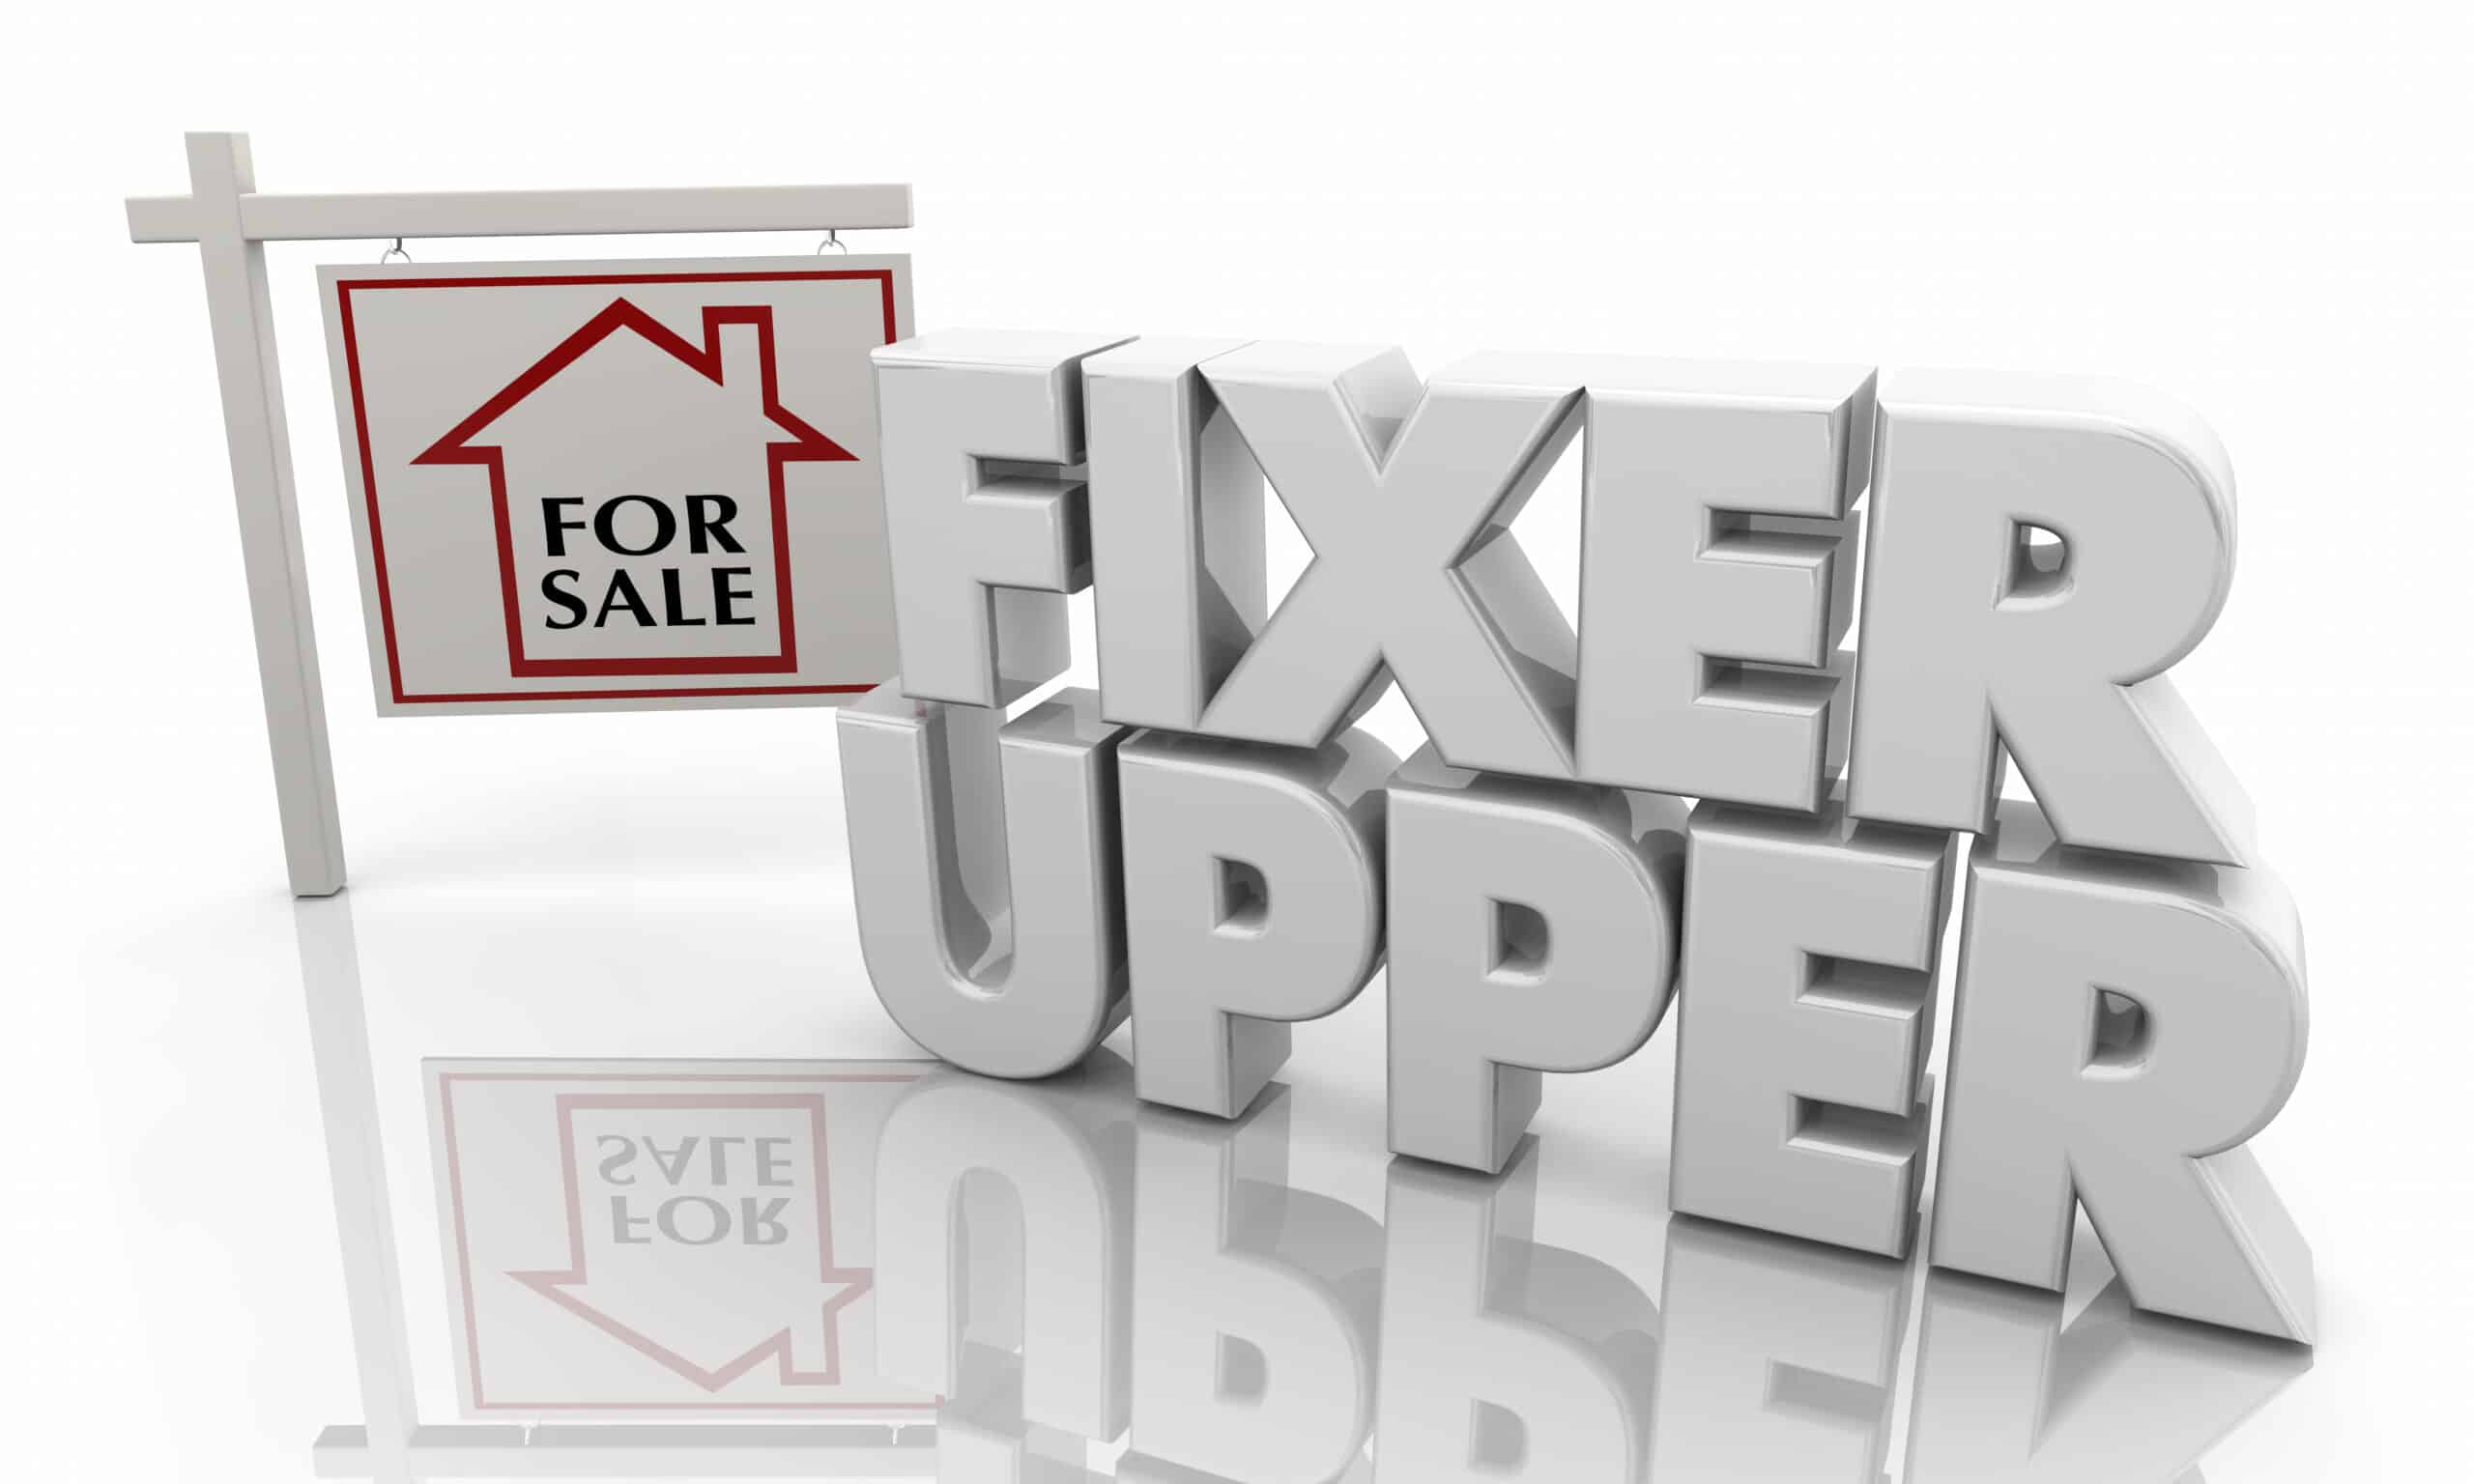 FHA Home Loans for Fixer Uppers | The Doce Group